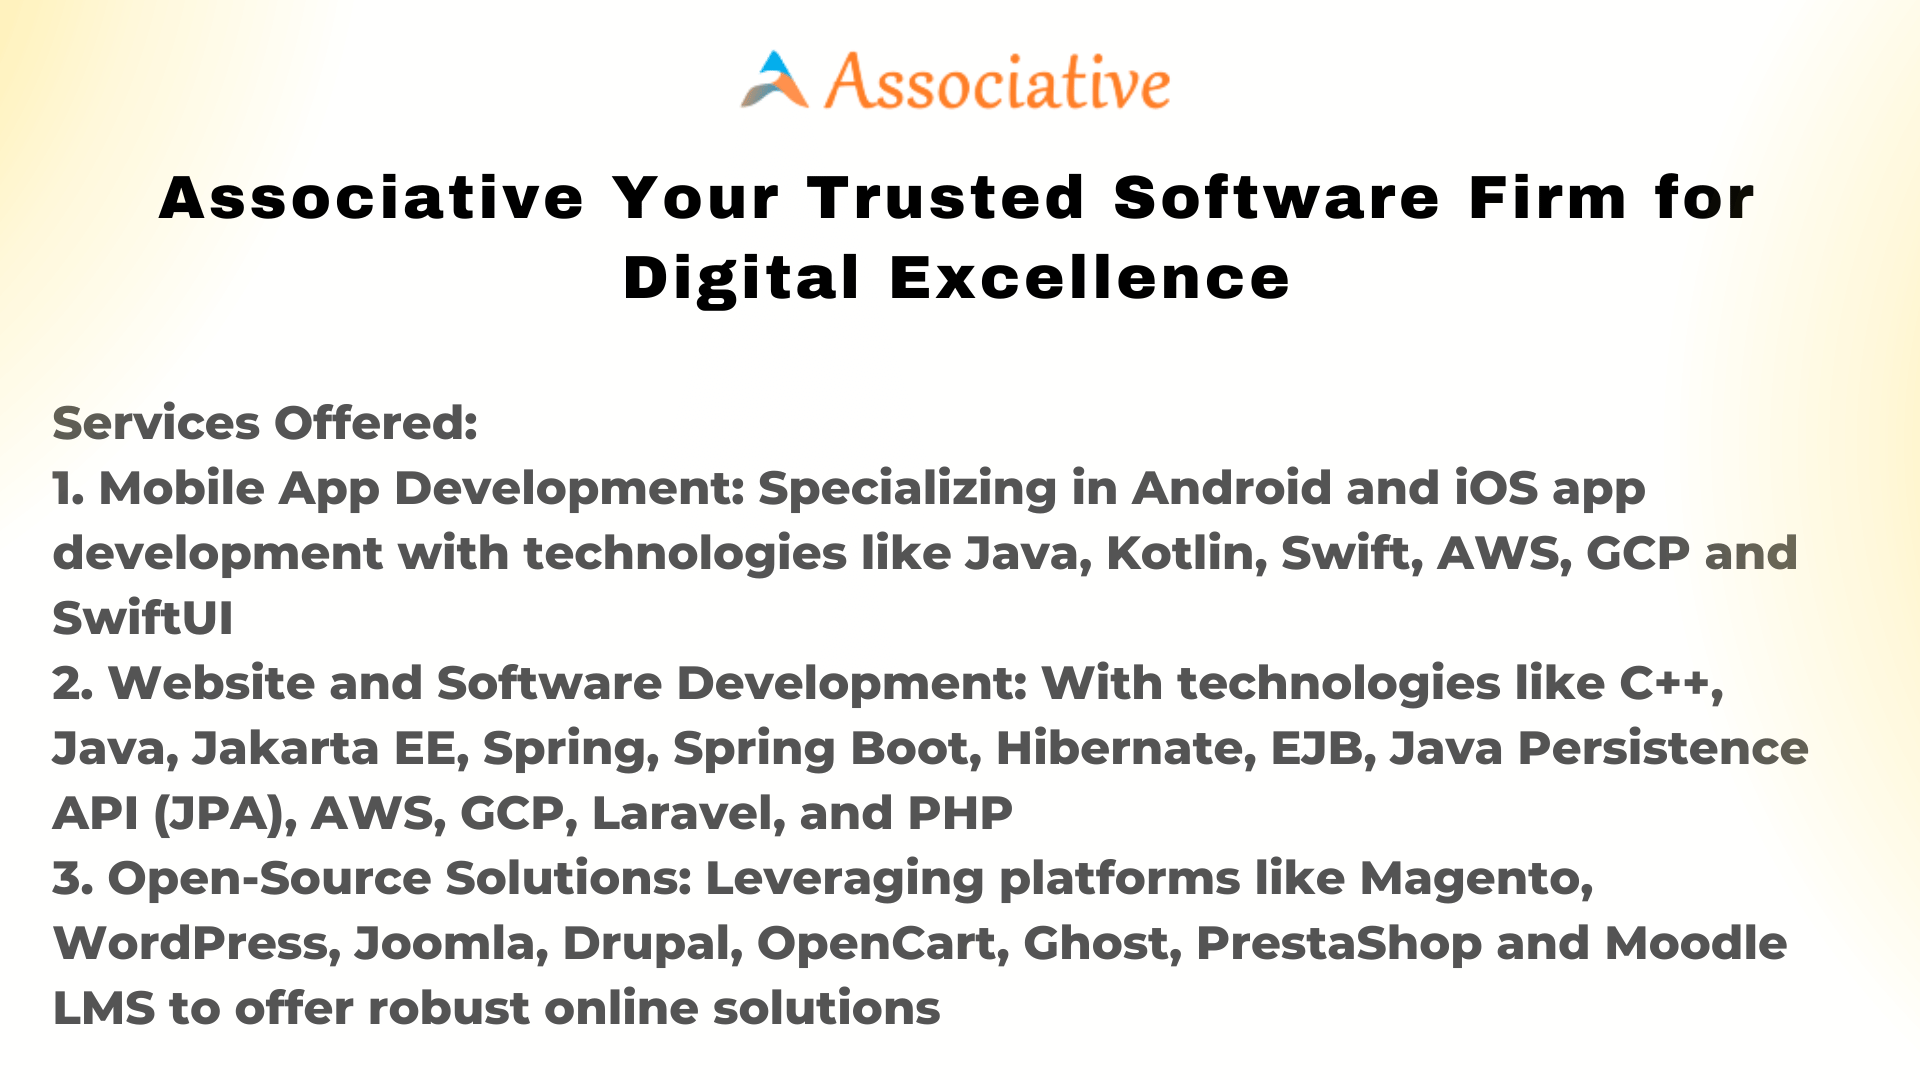 Associative Your Trusted Software Firm for Digital Excellence